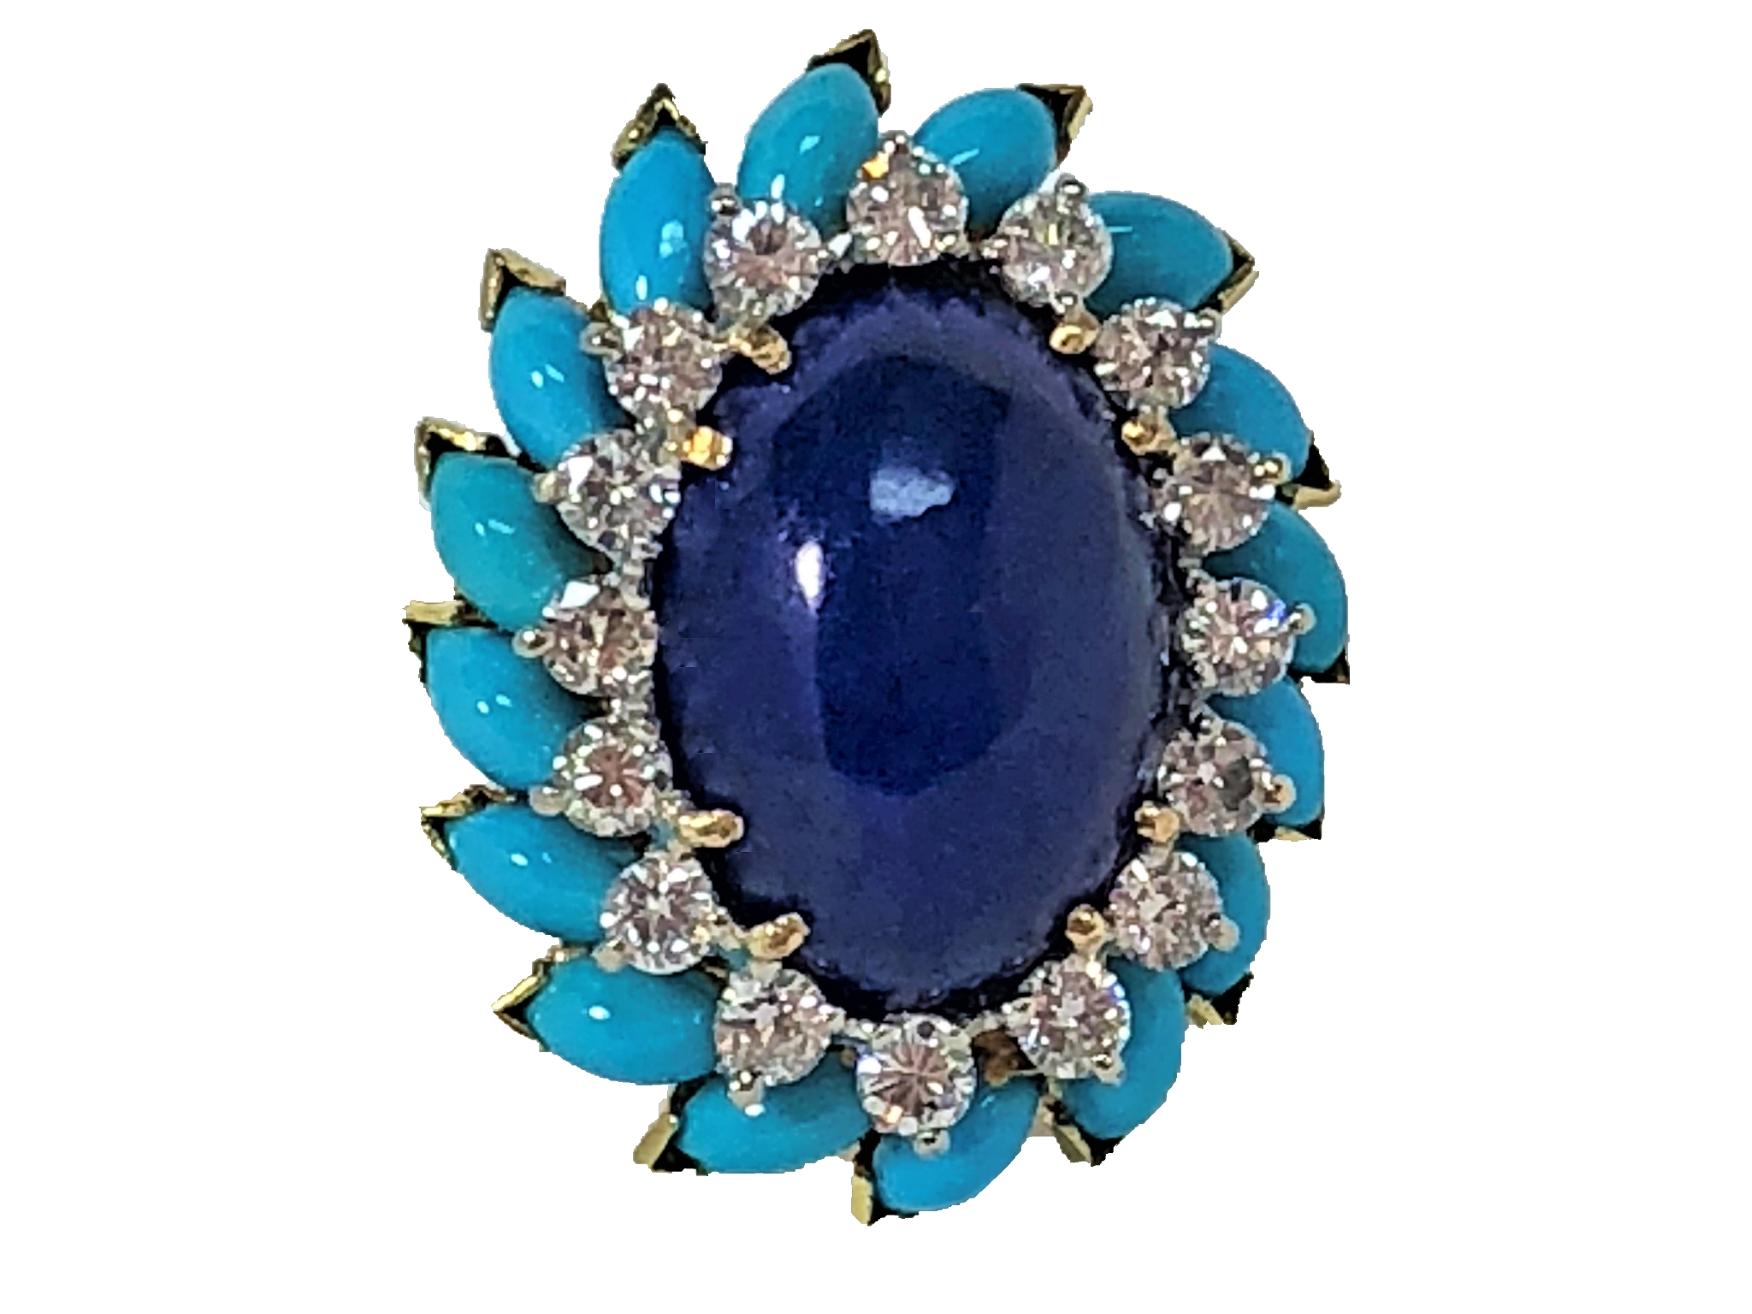 Made by La Triomphe, this large scale, dramatic, 18K Yellow Gold  ring is set with one oval 
Lapis Lazuli cabochon in the center (29mm x 20mm), surrounded by 16 round brilliant cut diamonds weighing an approximate total of 1.55CT of overall G Color